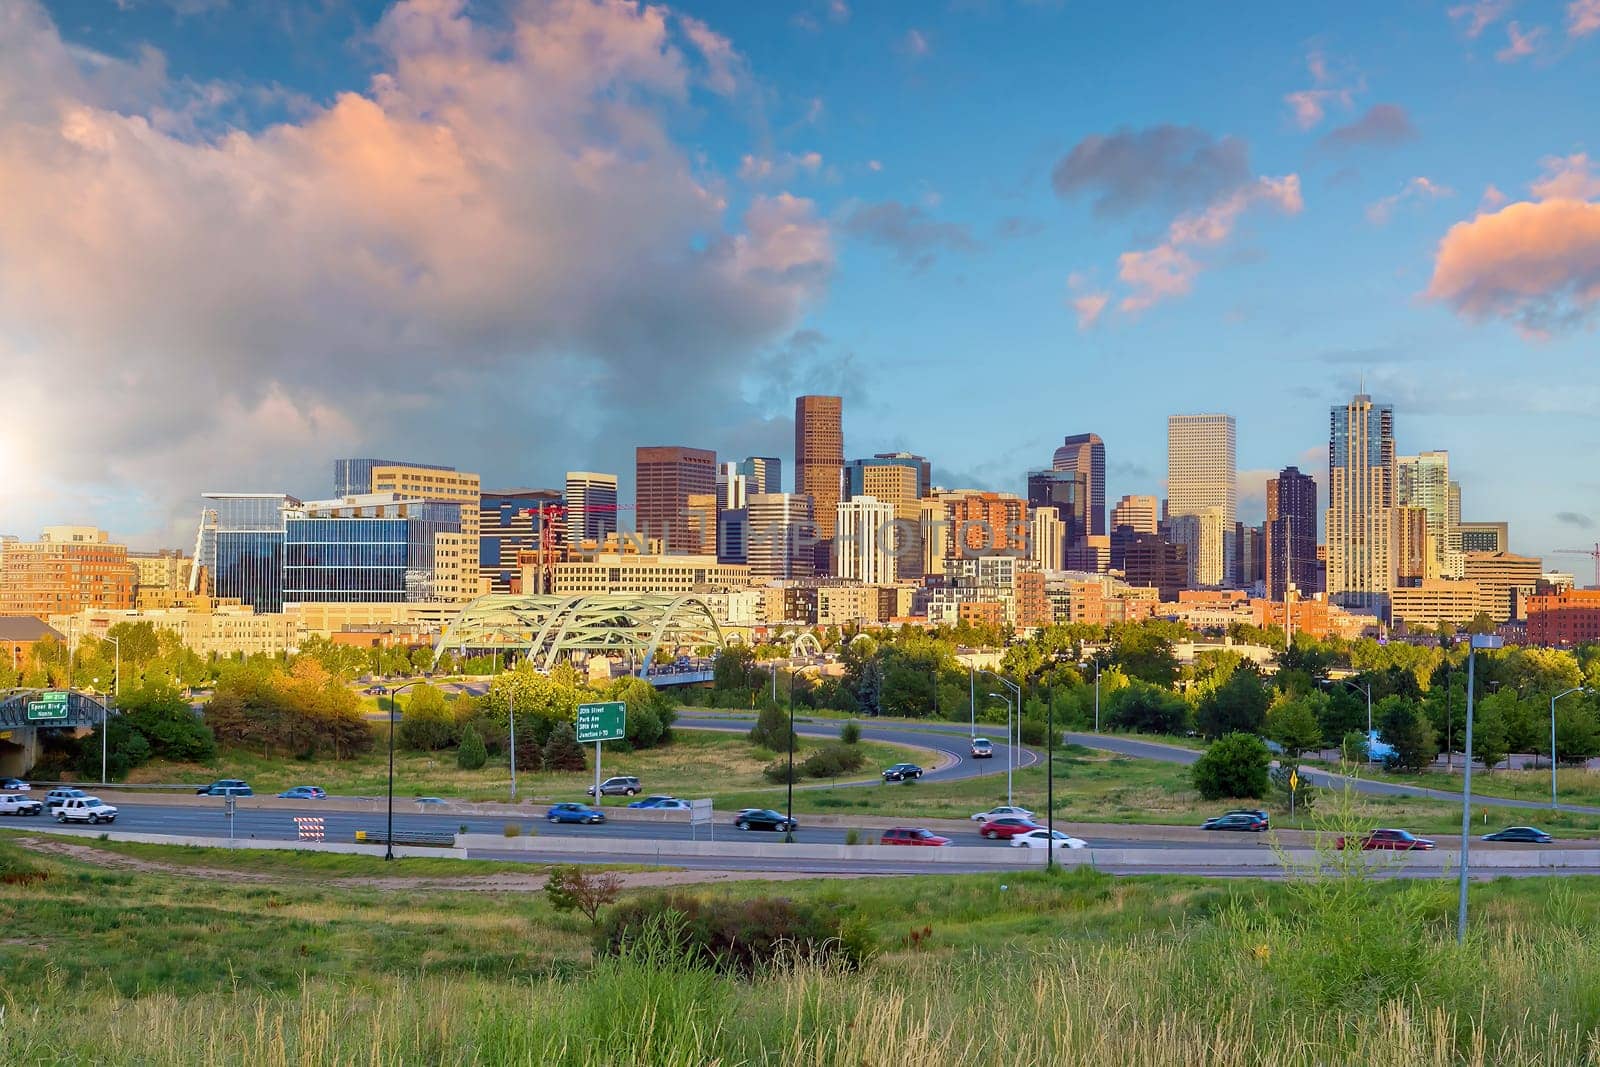 Denver downtown city skyline, cityscape of Colorado in USA at sunset